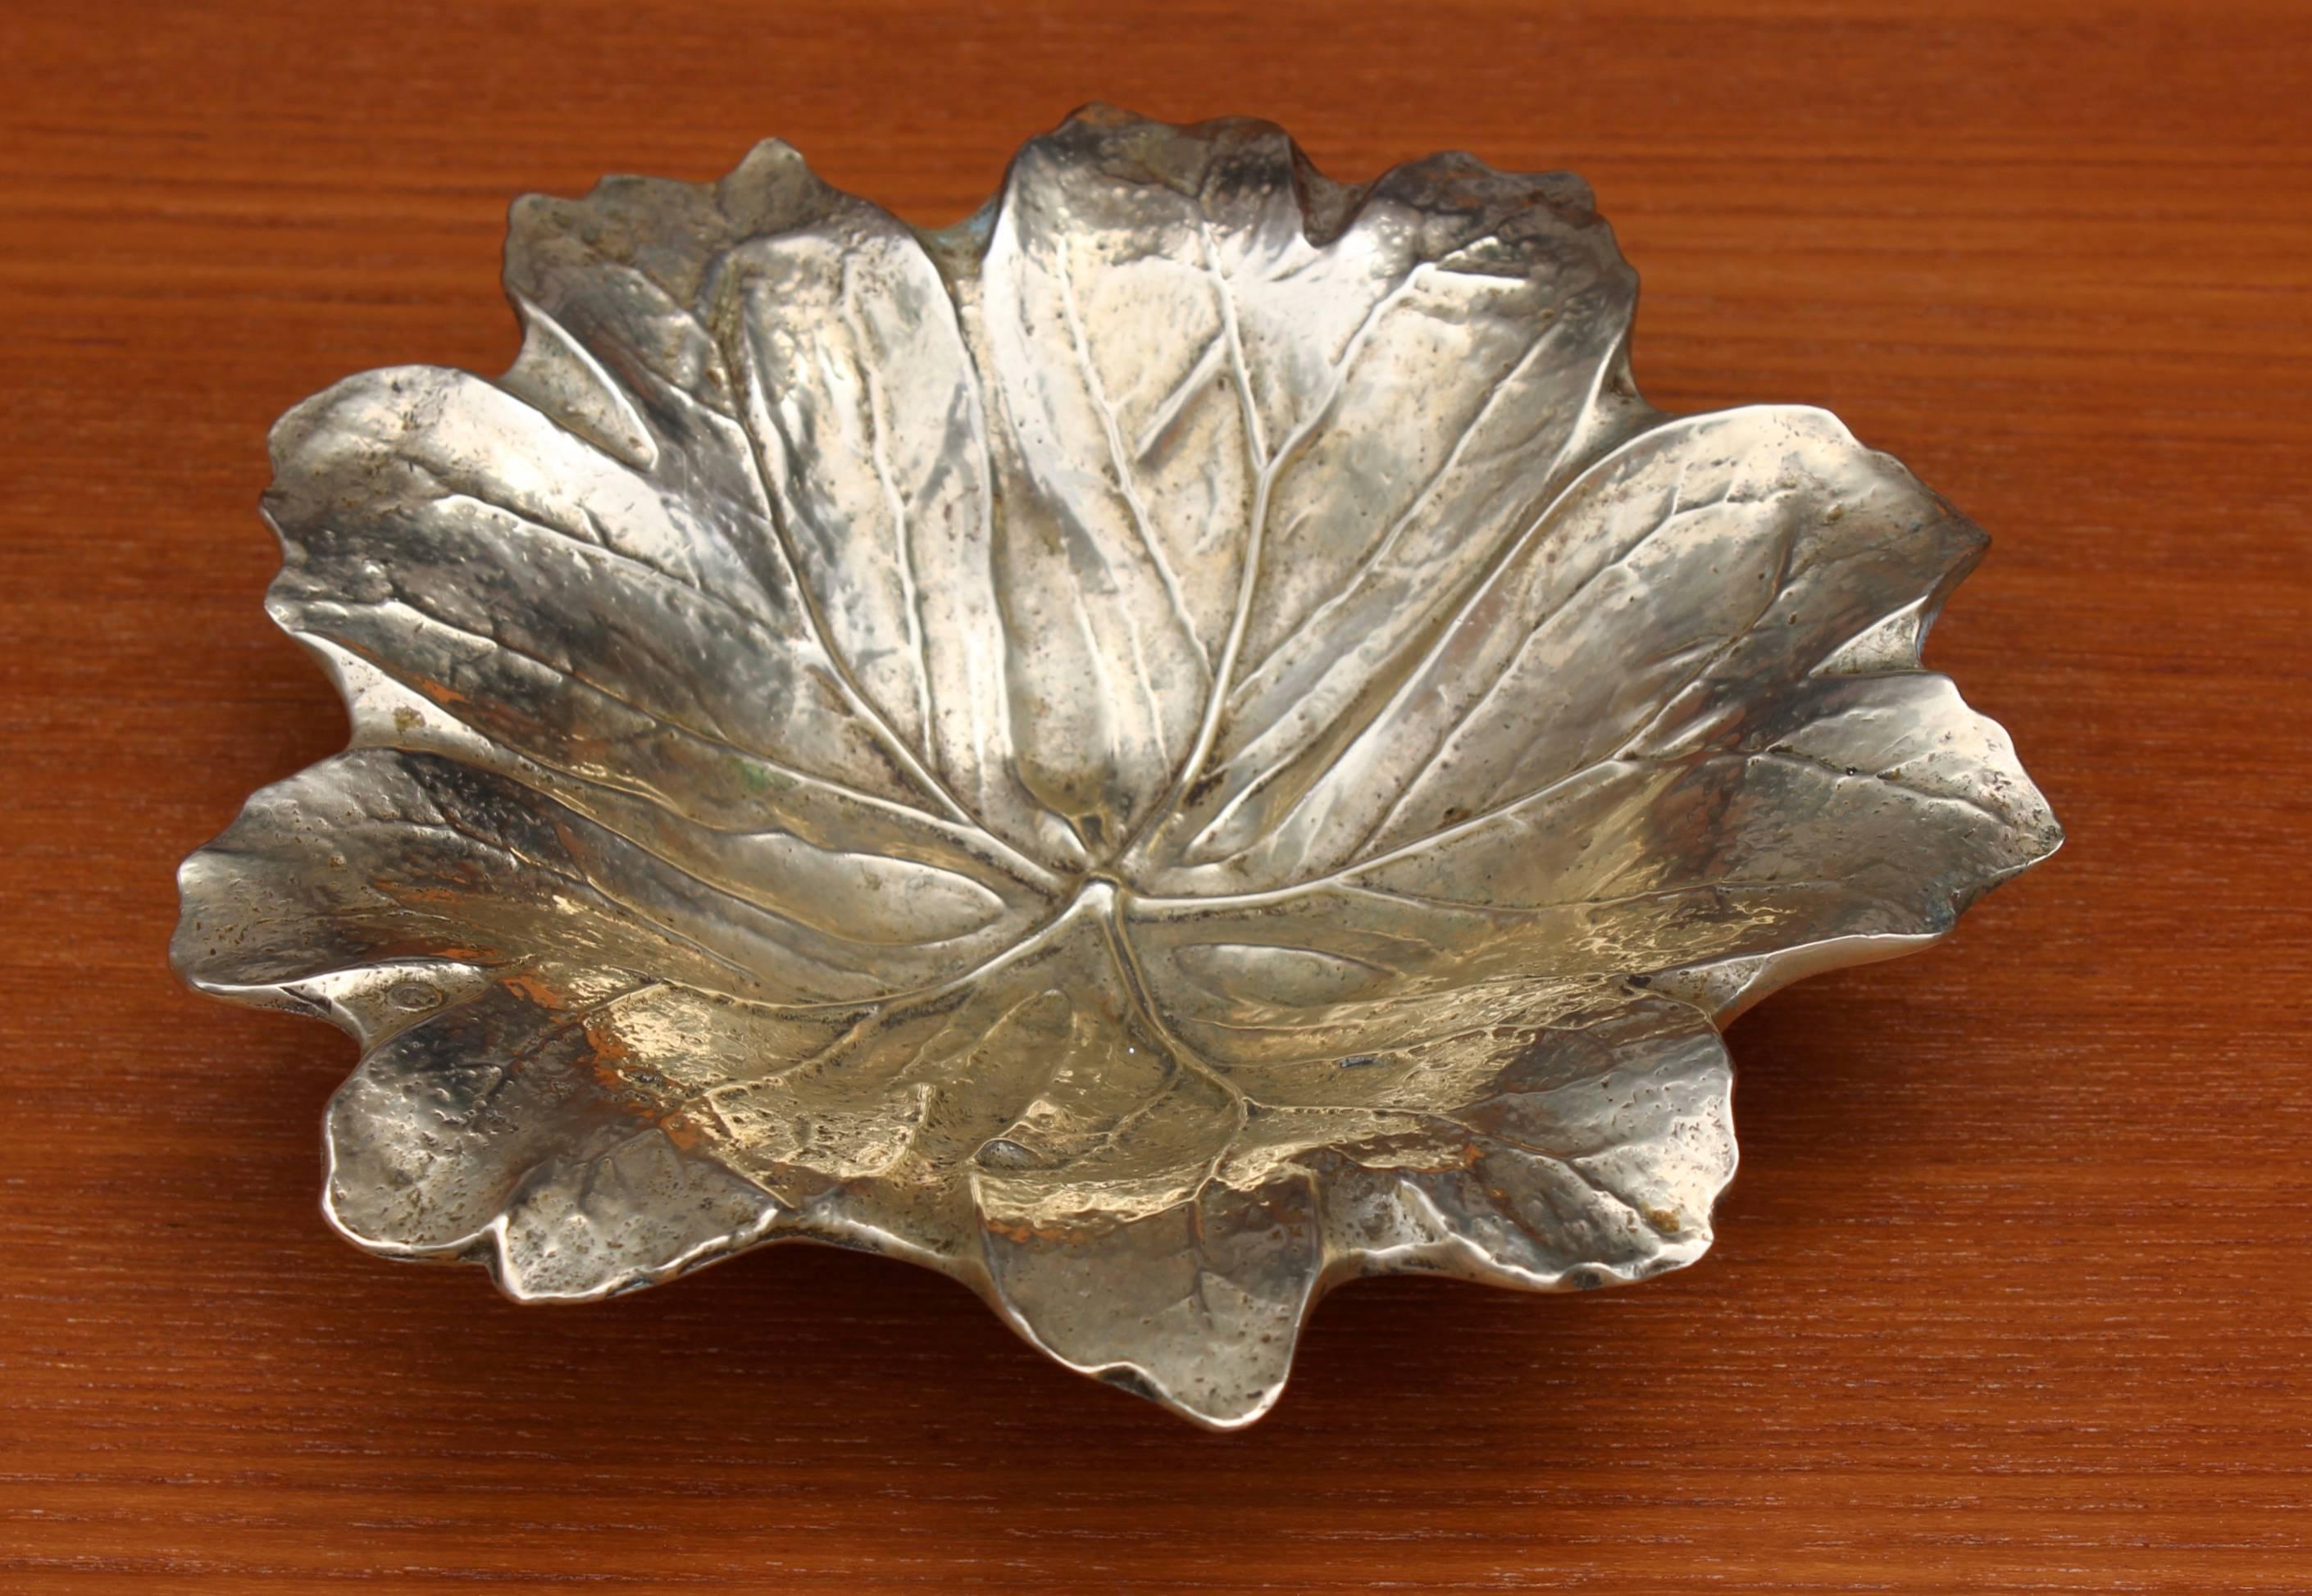 Stunning 1940s solid brass leaf dish beautifully detailed, lightly polished.